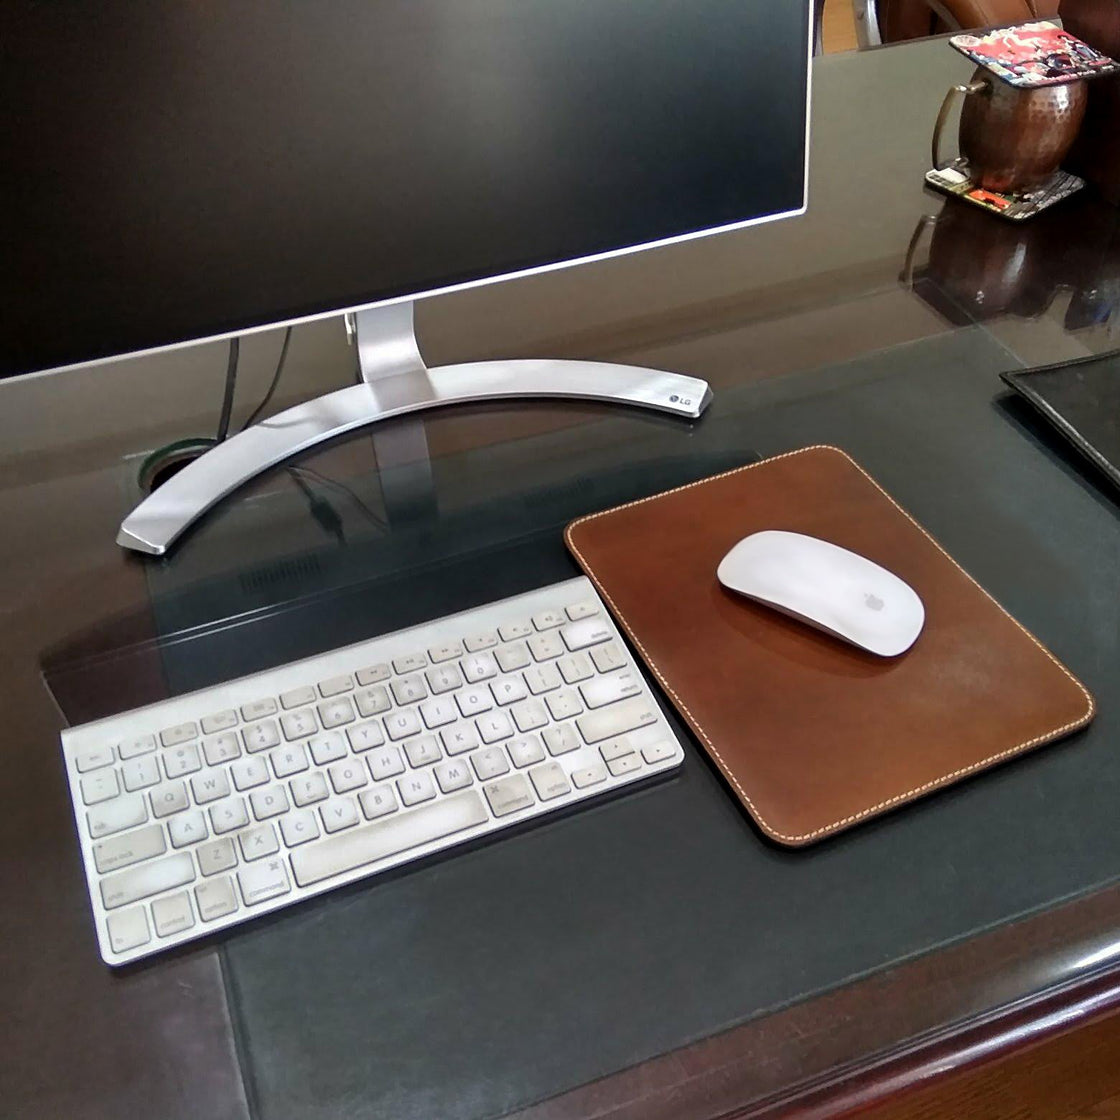 Leather Mouse Pads for Laptop Computer PC Gaming Apple Executive Work Desk Handmade